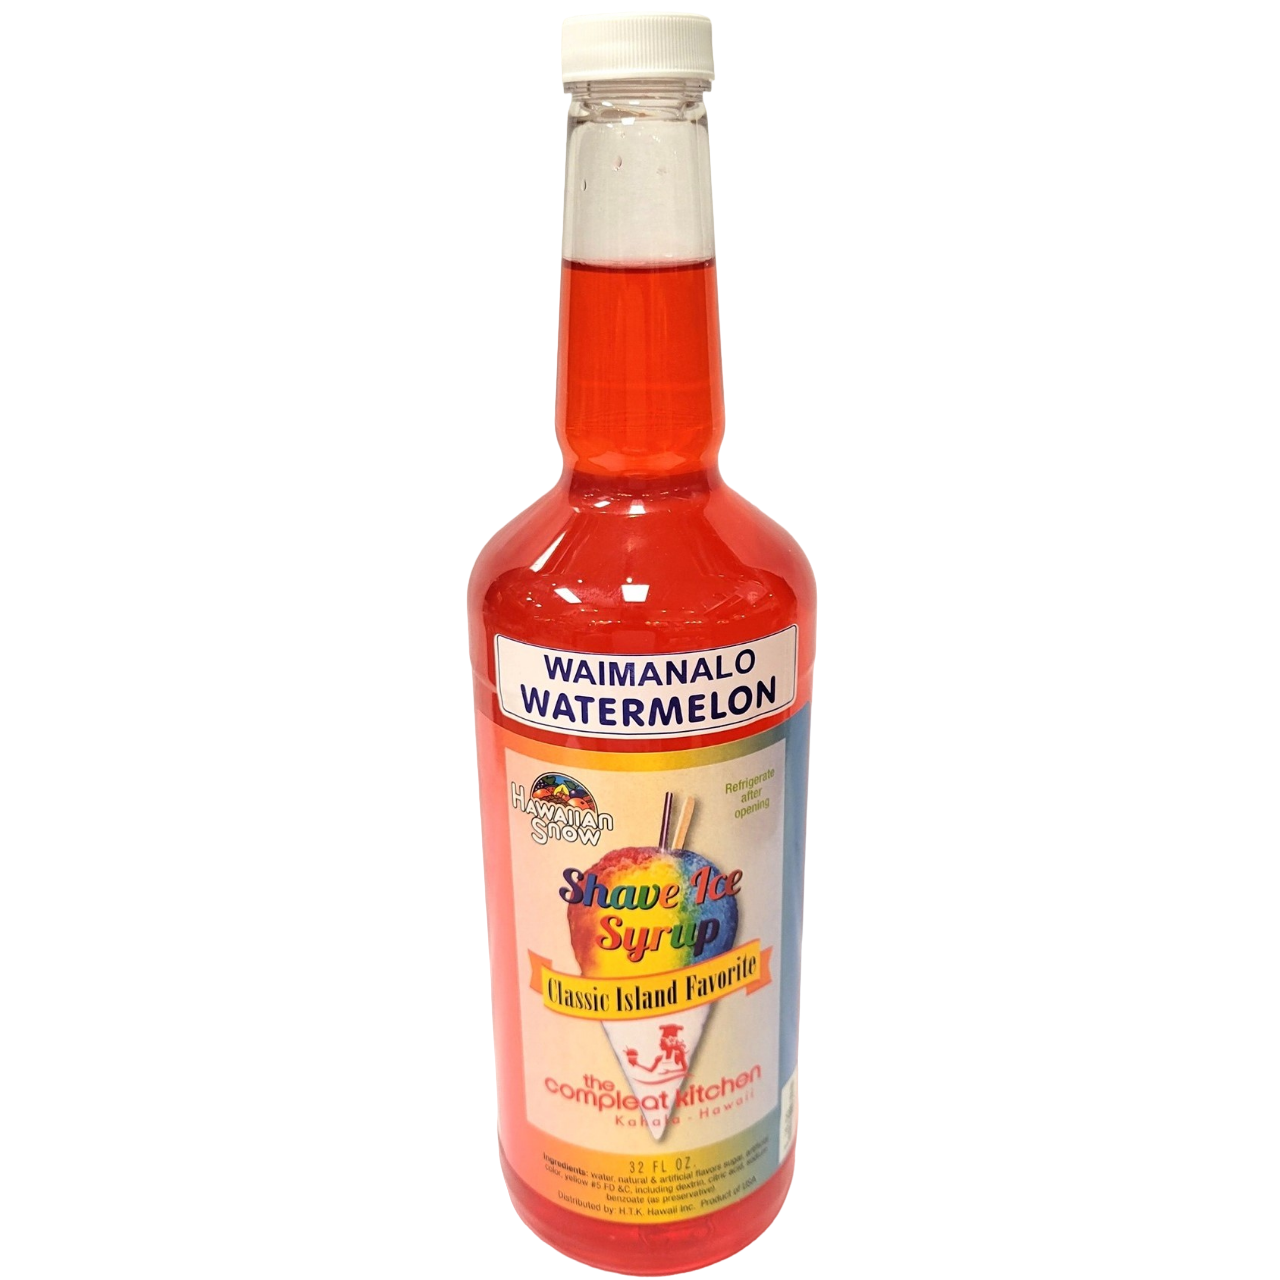 The Compleat Kitchen Shave Ice Syrup - Waimanalo Watermelon